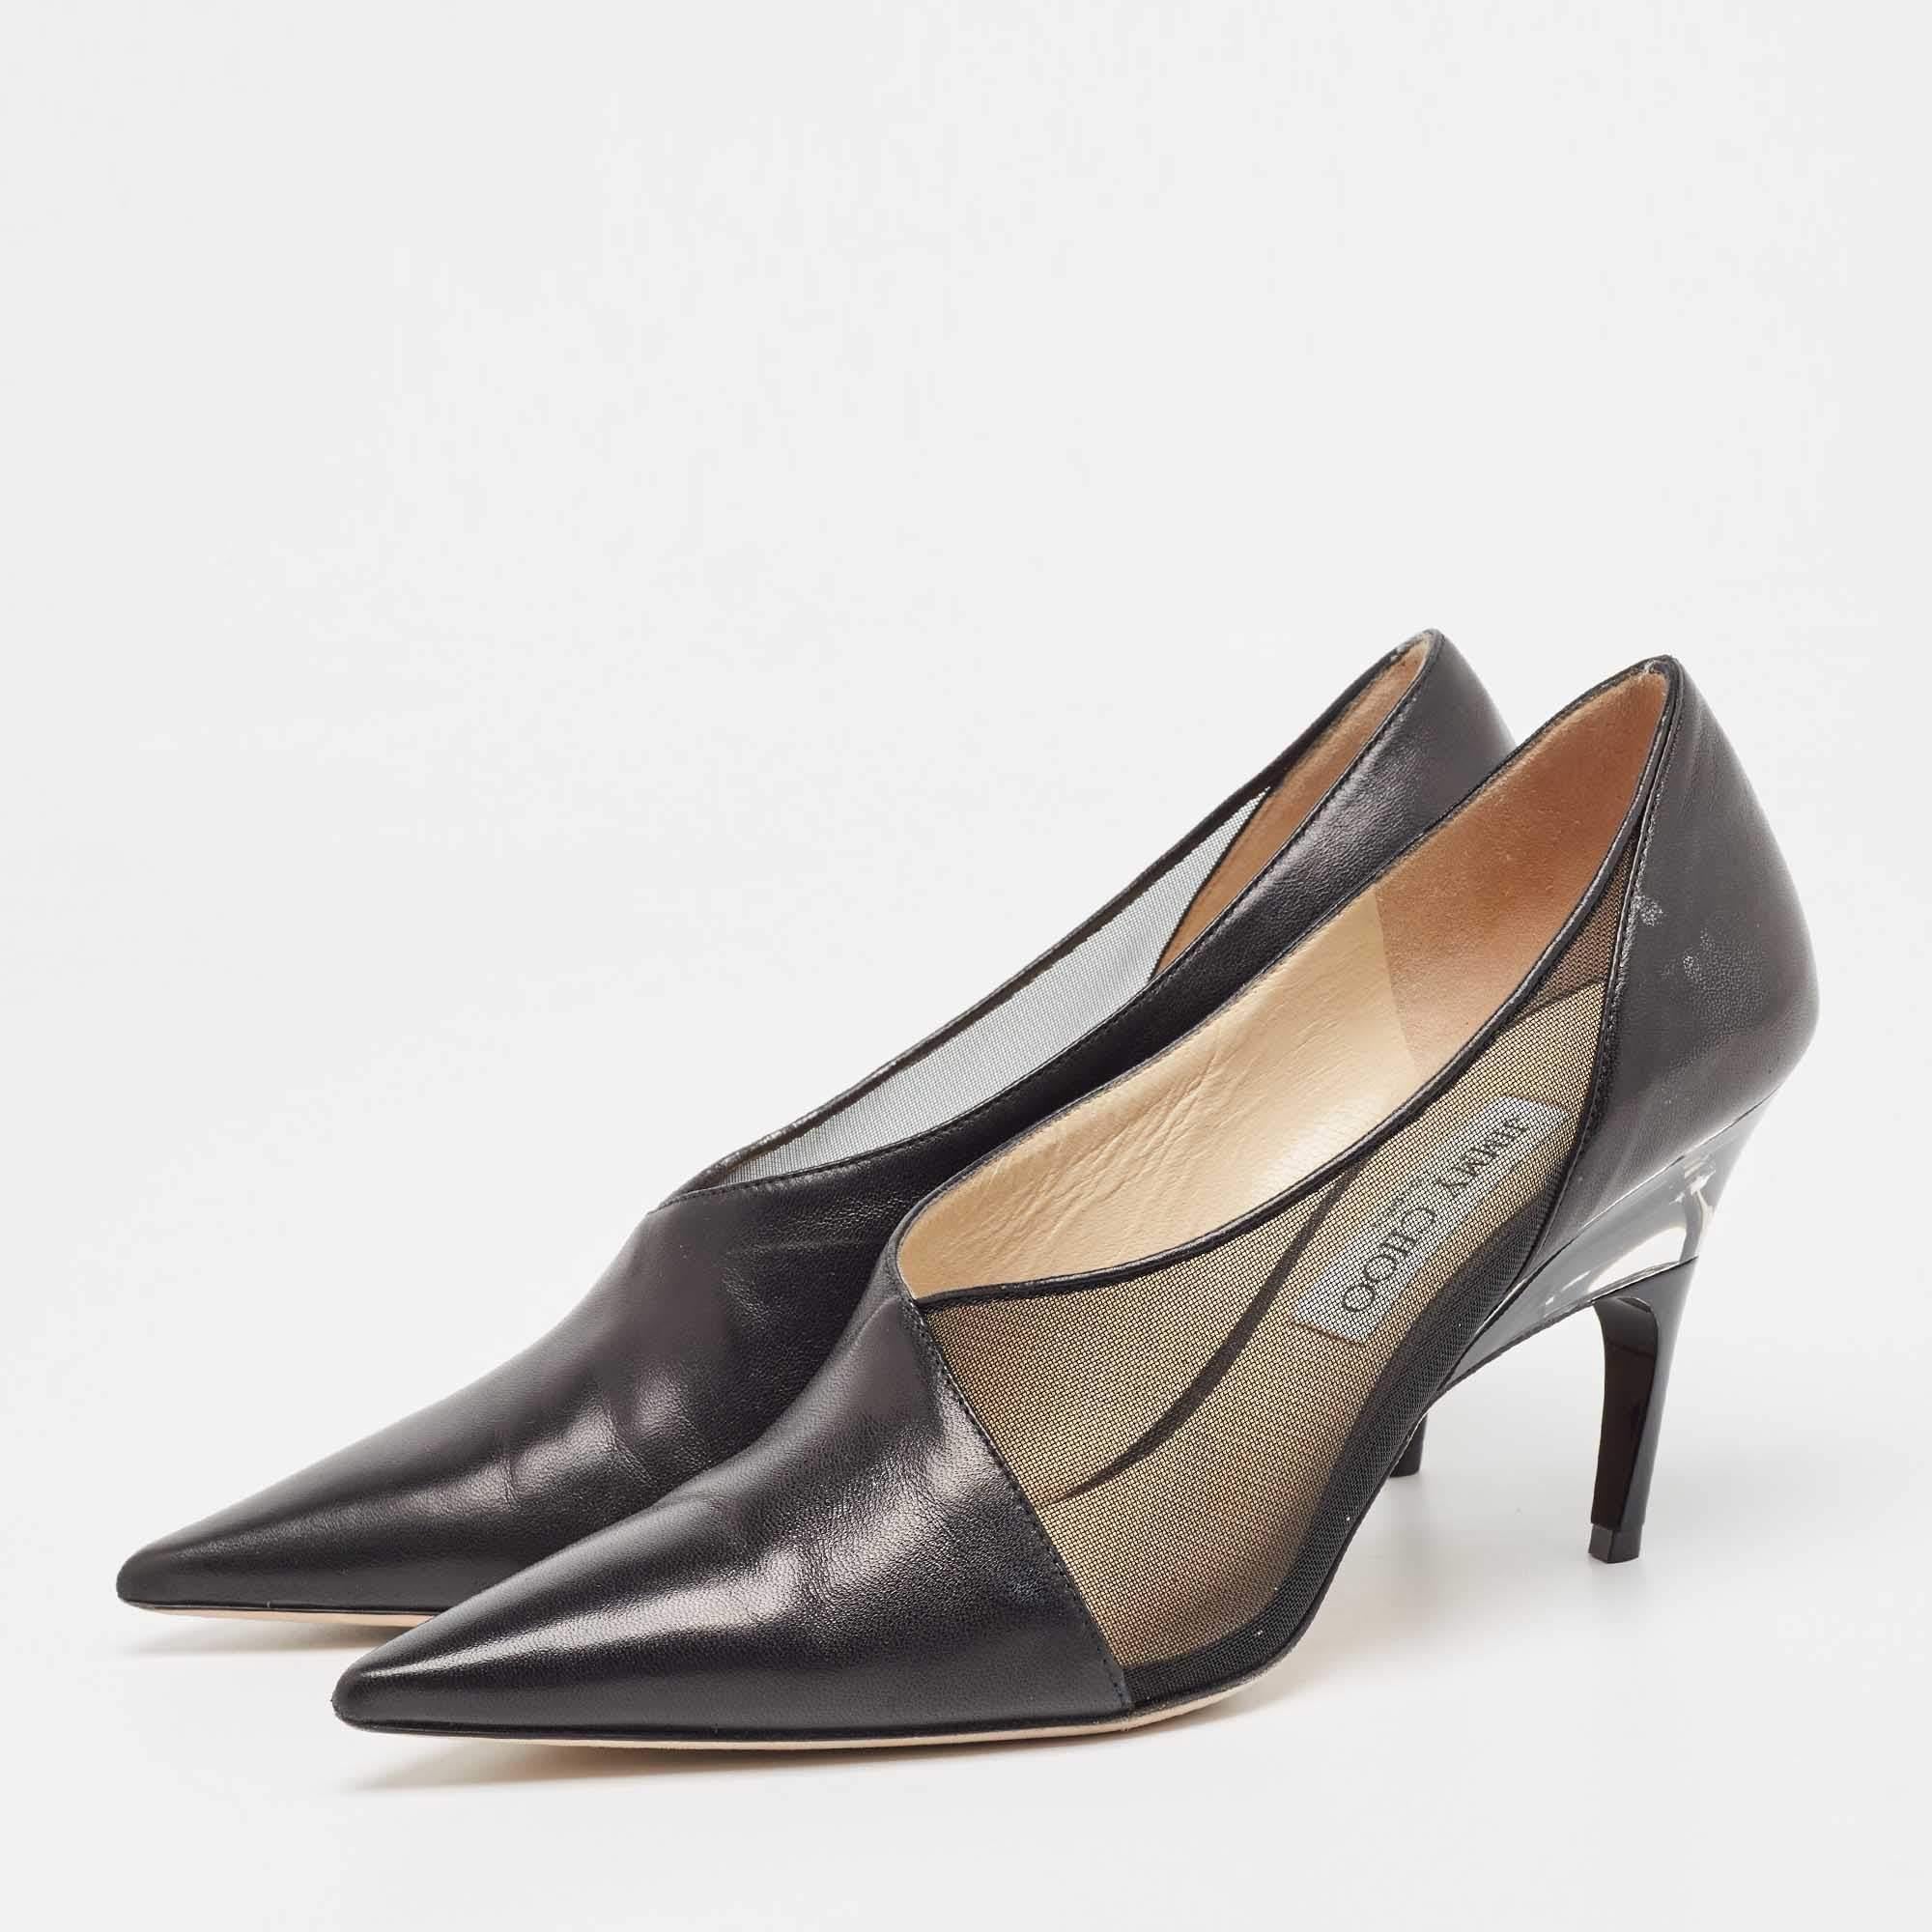 Jimmy Choo's classy take on footwear is captured in this design. The pumps are wonderfully crafted using high-quality materials and set on durable soles. Wear yours with cropped hemlines to spotlight the modern construction.

